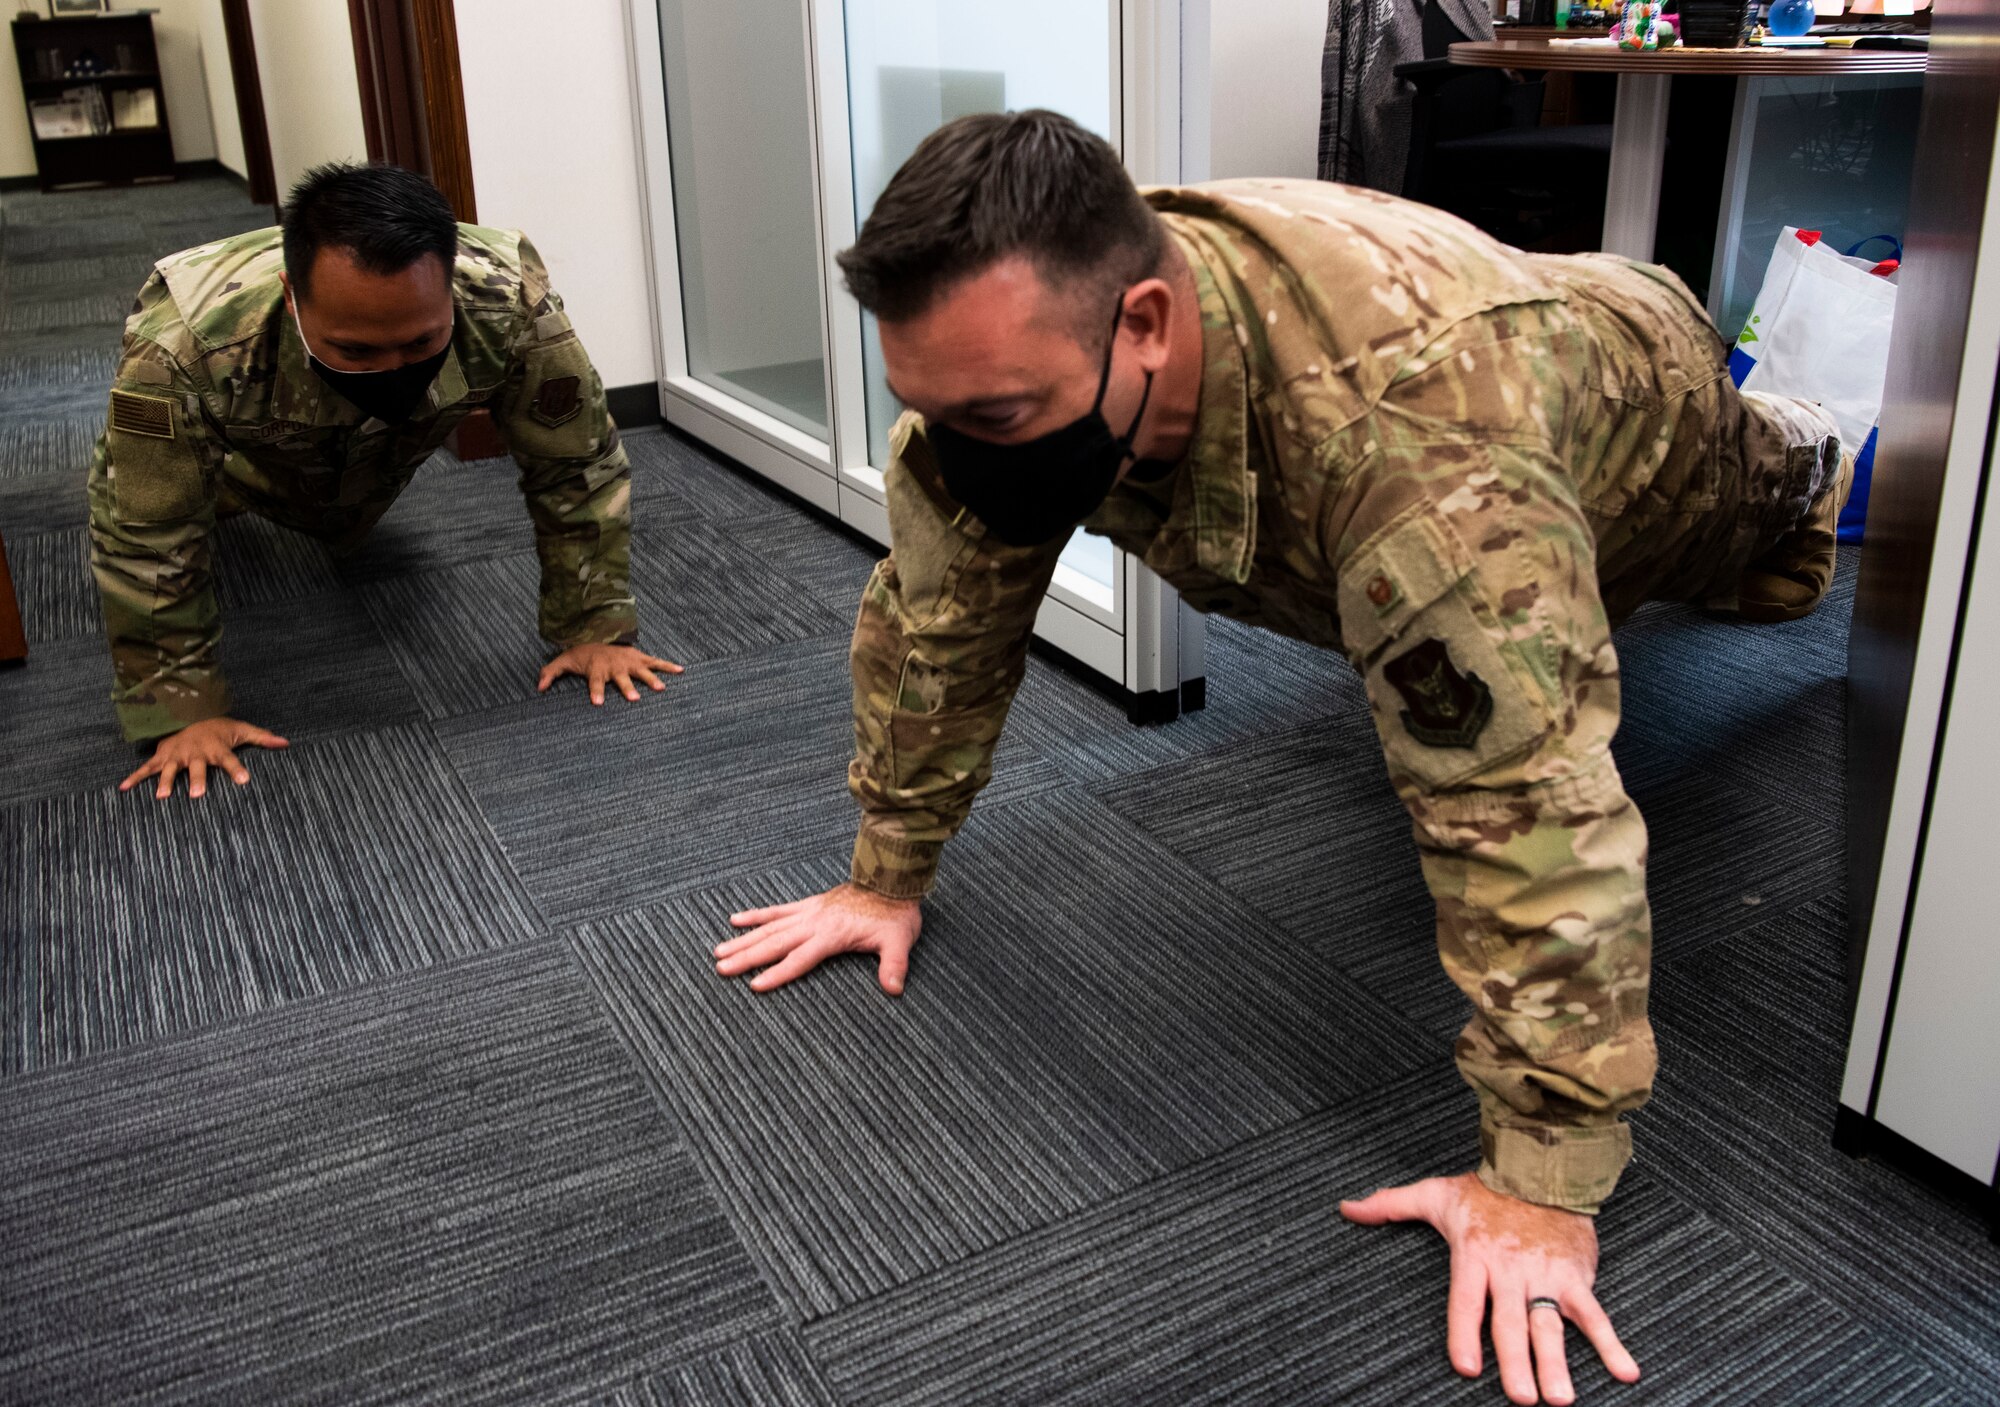 A photo of U.S. Air Force Staff Sgt. Mark Corpuz and Lt. Col. Cliff Harris, both who are part of the 624th Regional Support Group command staff, doing push-ups as part of a Resiliency Tactical Pause at Joint Base Pearl Harbor-Hickam, Hawaii, Sept. 12, 2020, during the Group's Unit Training Assembly.